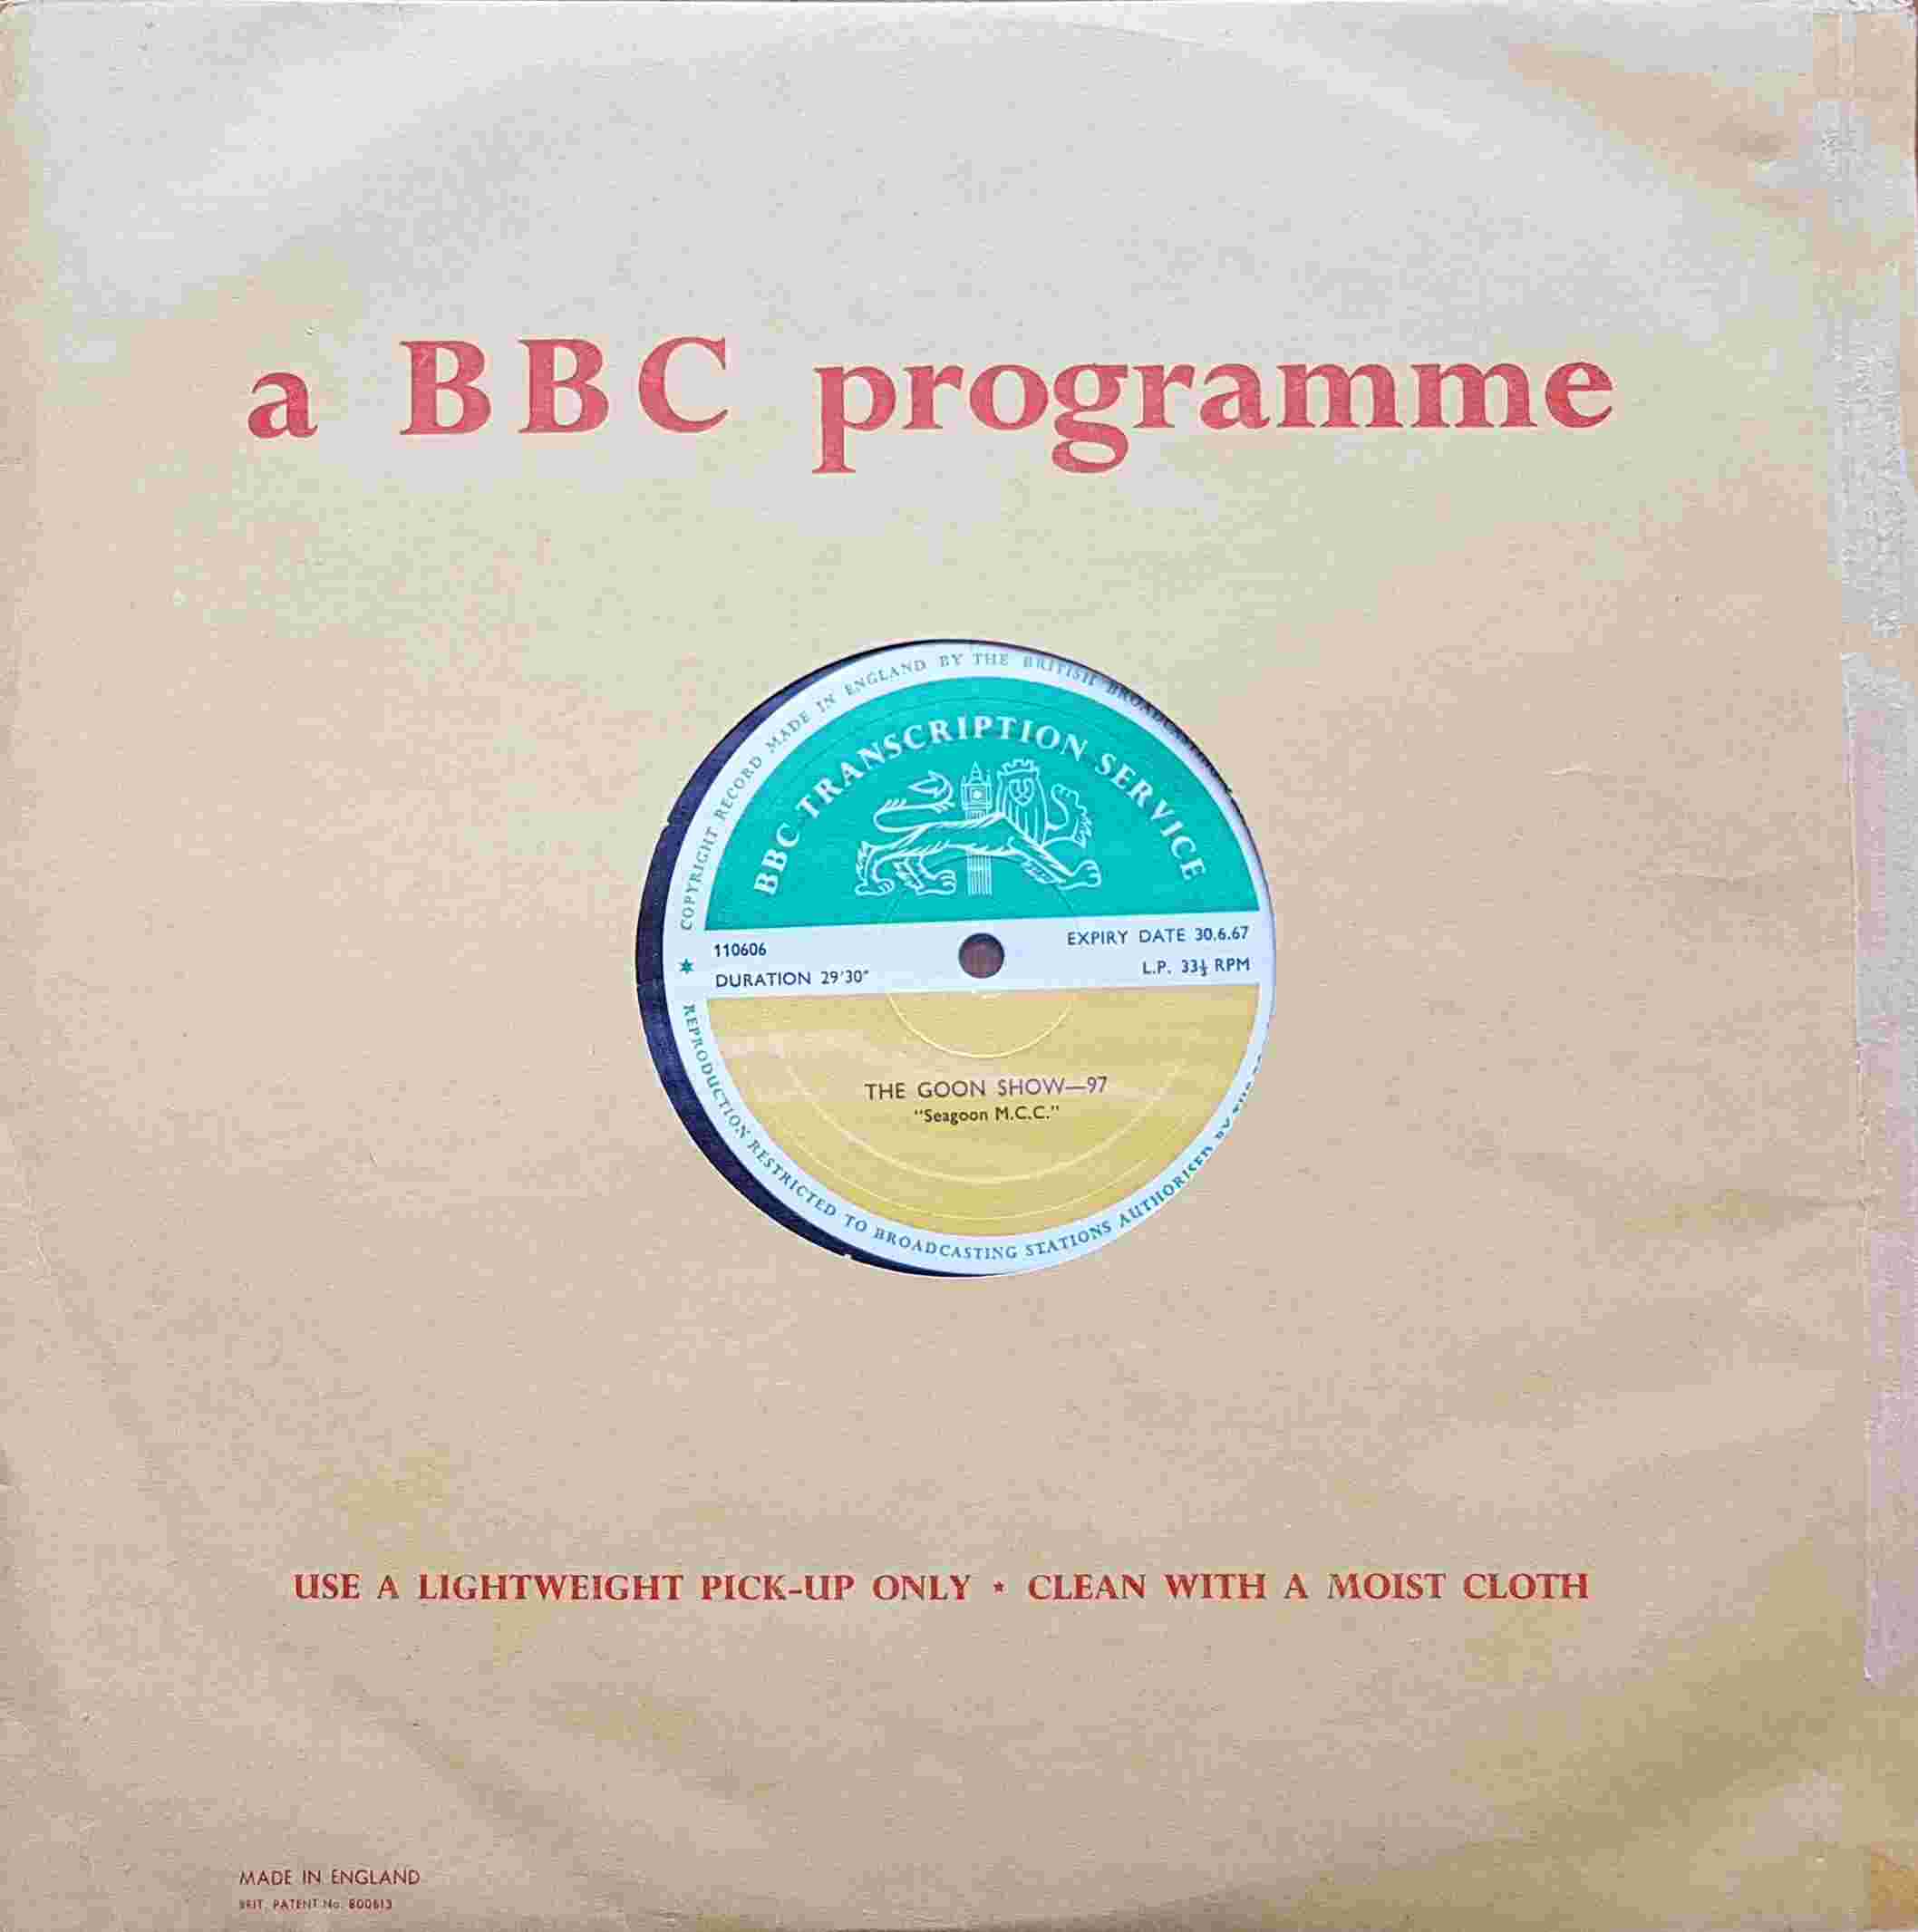 Picture of 110606 The Goon show - 97 & 98 by artist Spike Milligan / Eric Sykes from the BBC albums - Records and Tapes library